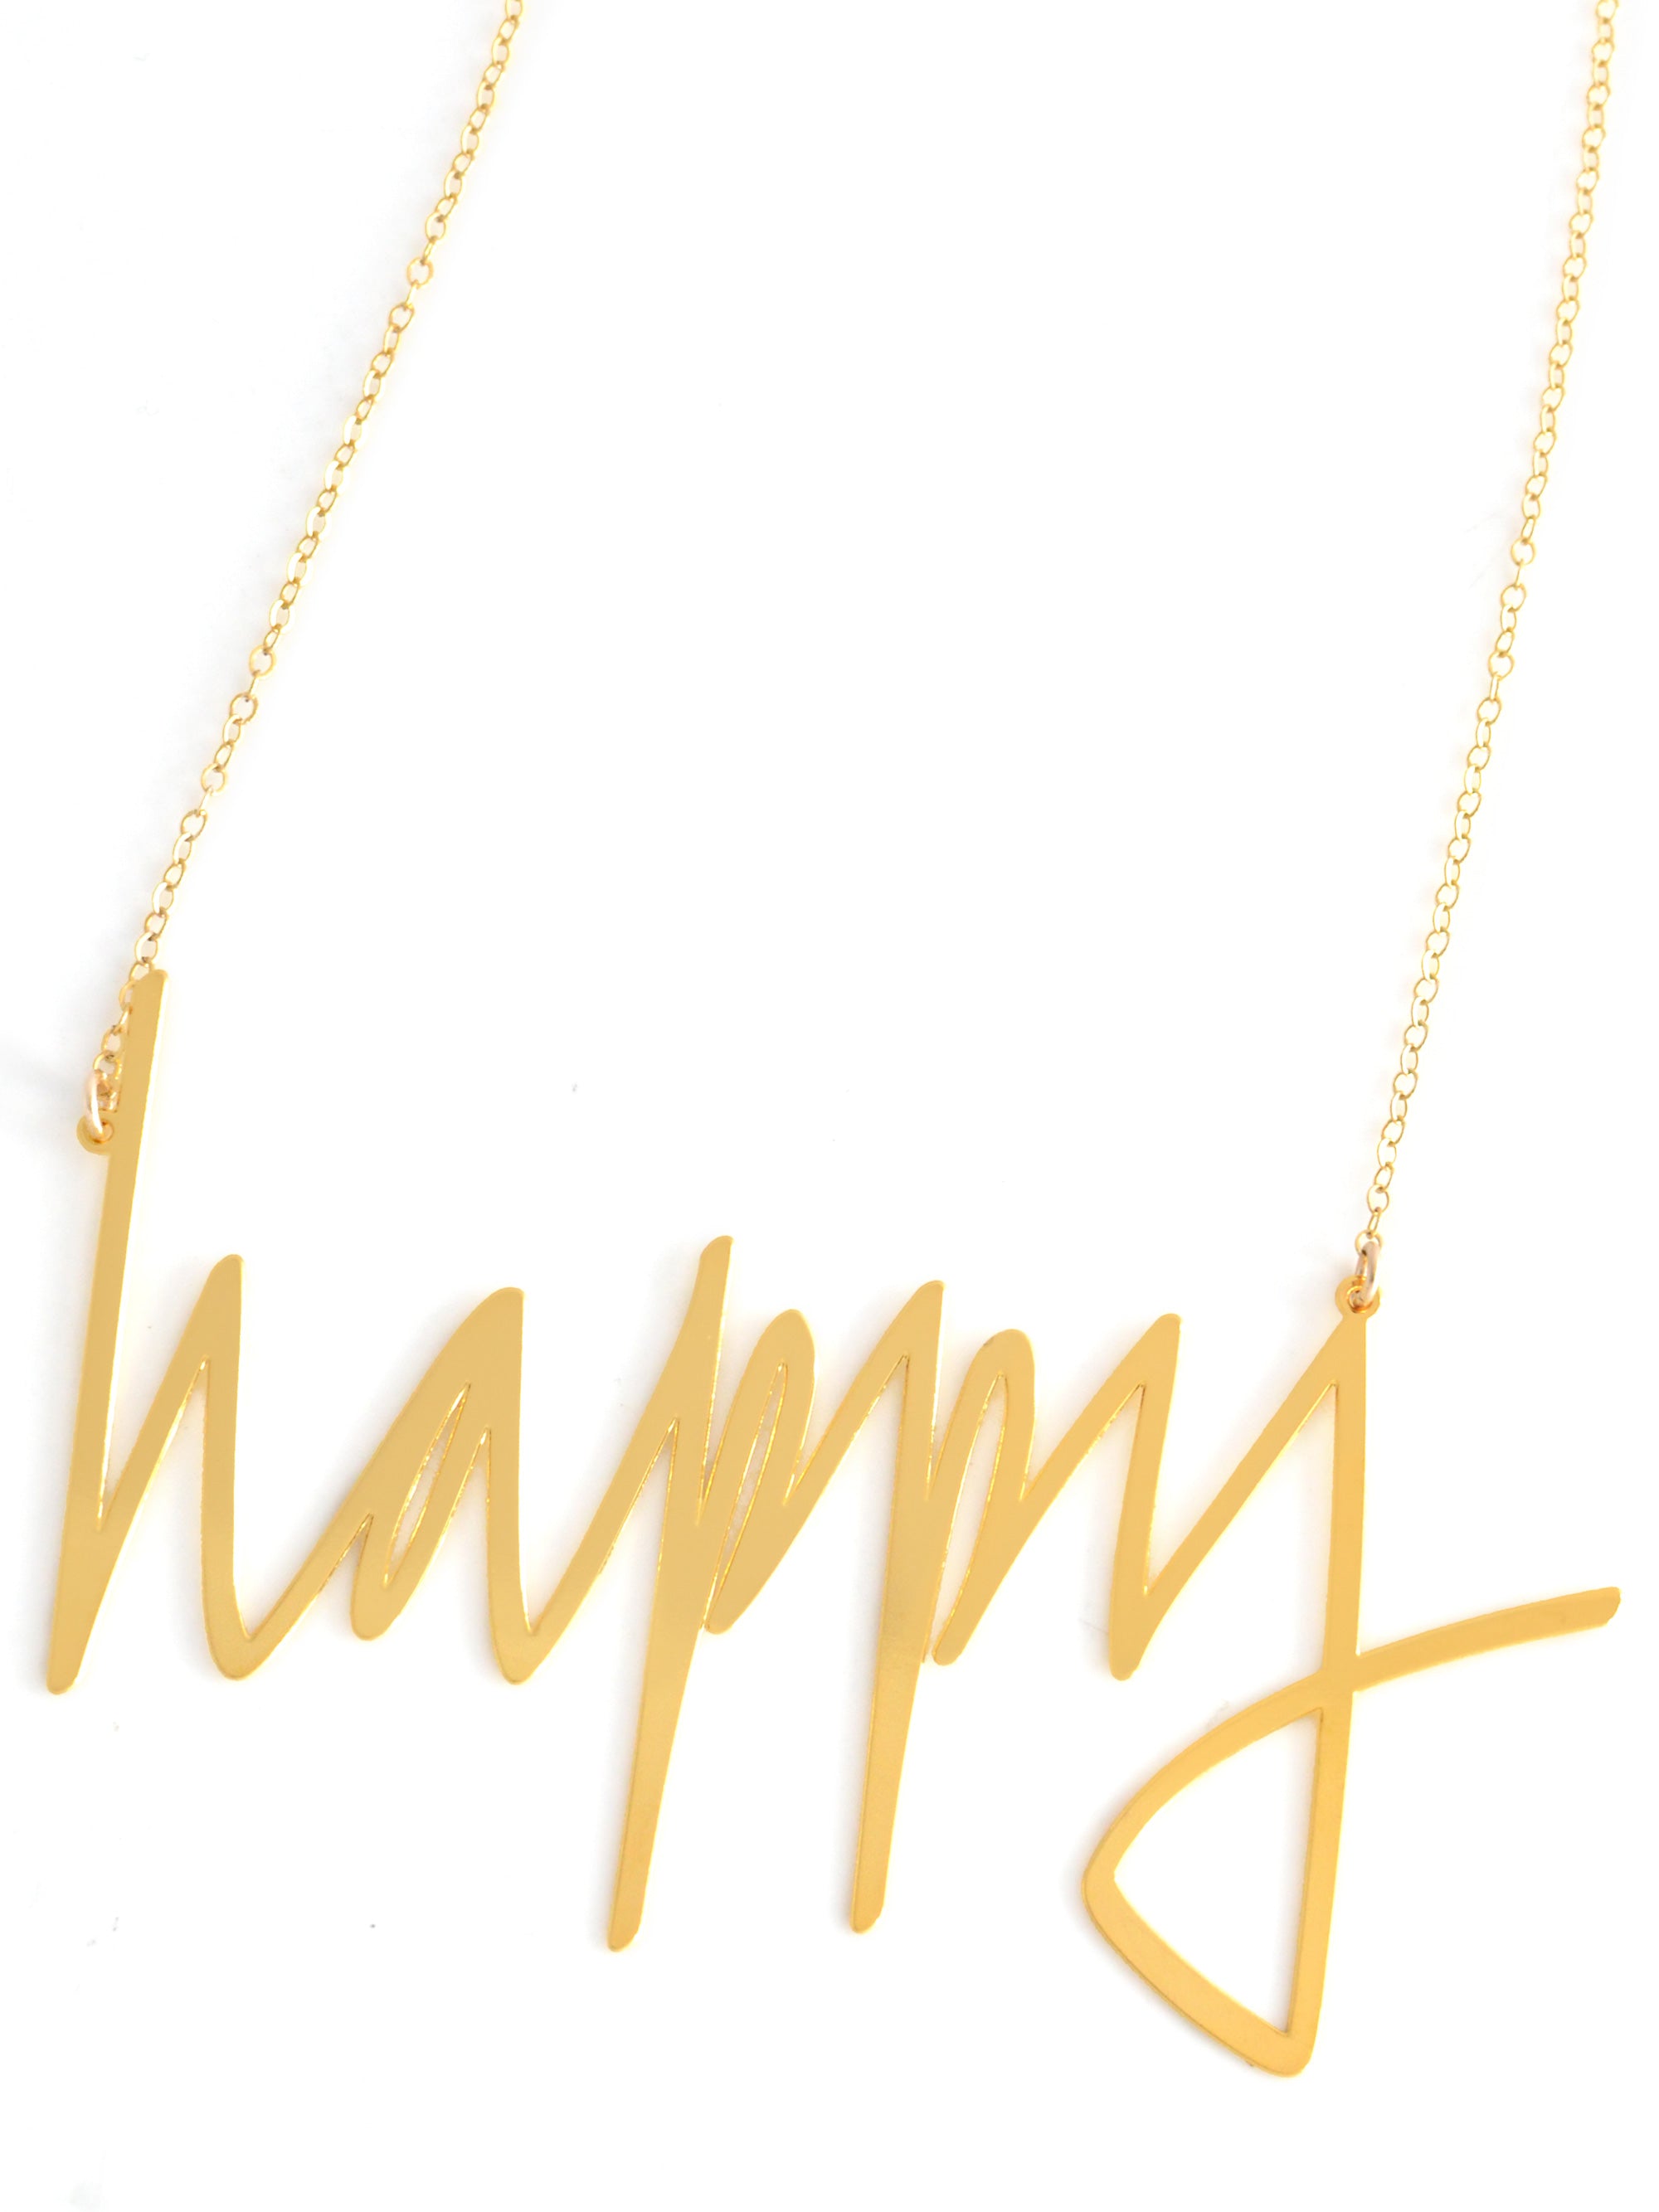 Happy Necklace - High Quality, Affordable, Hand Written, Self Love, Mantra Word Necklace - Available in Gold and Silver - Small and Large Sizes - Made in USA - Brevity Jewelry